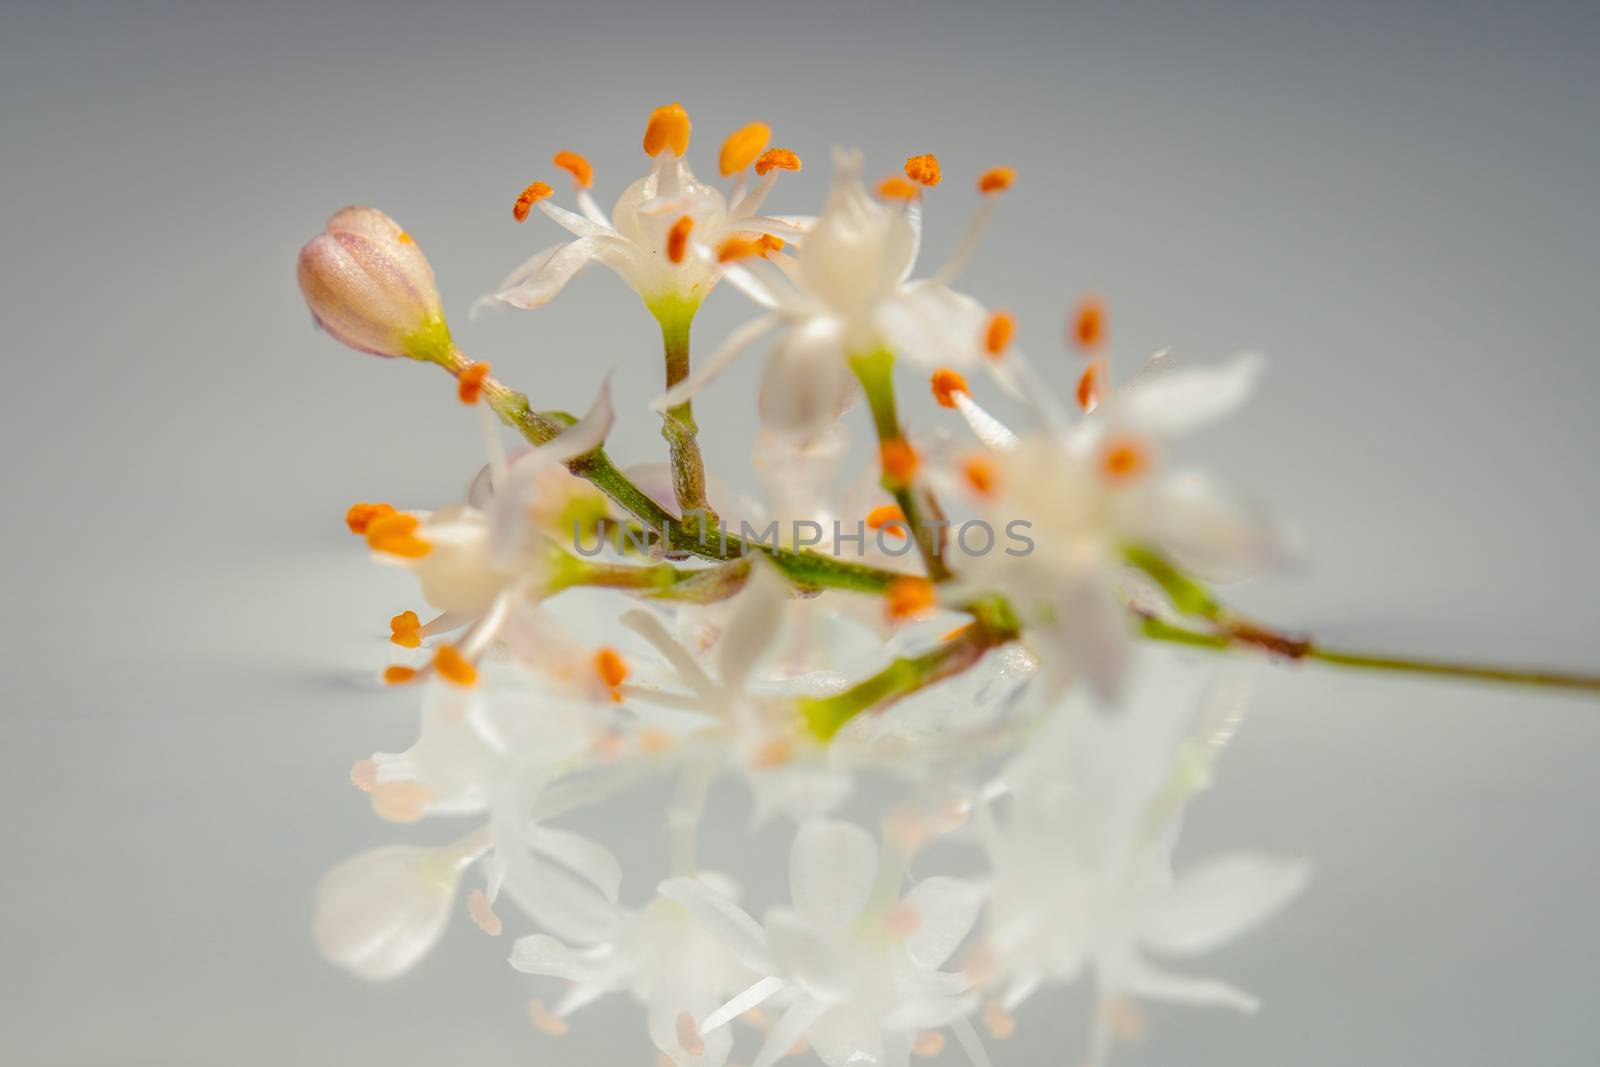 A closeup photo of a branch of white asparagus densiflorus flowers floating on water